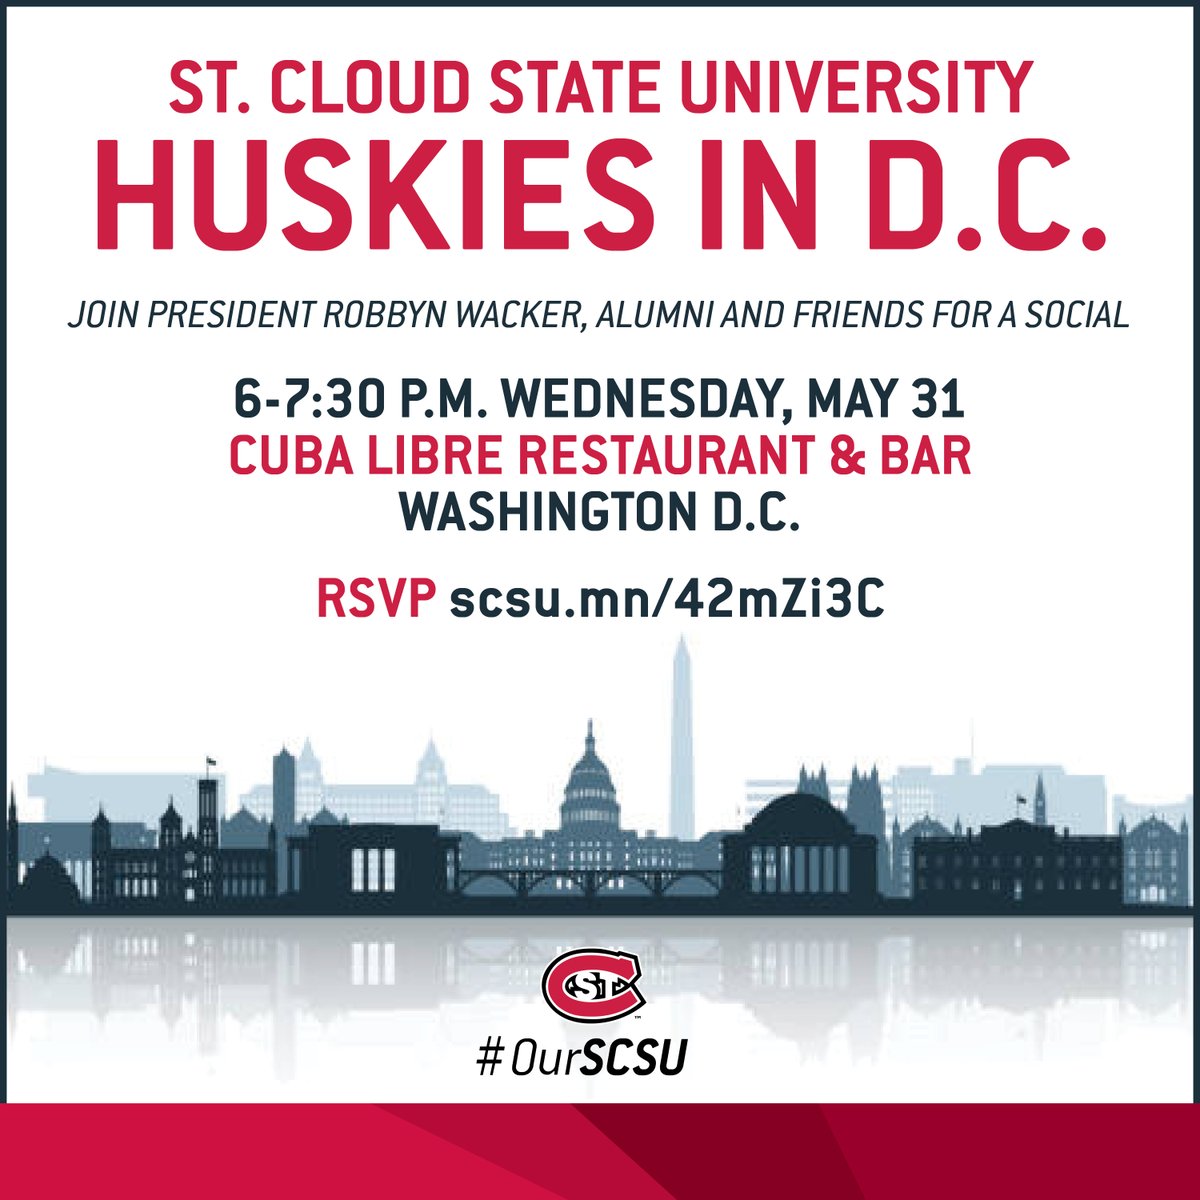 Huskies in and around D.C.: Join #SCSU President Robbyn Wacker and @stcloudstate alumni and friends for a social from 6-7:30 p.m. May 31 at Cuba Libre, 801 Ninth Street NW in Washington D.C. RSVP at scsu.mn/42mZi3C